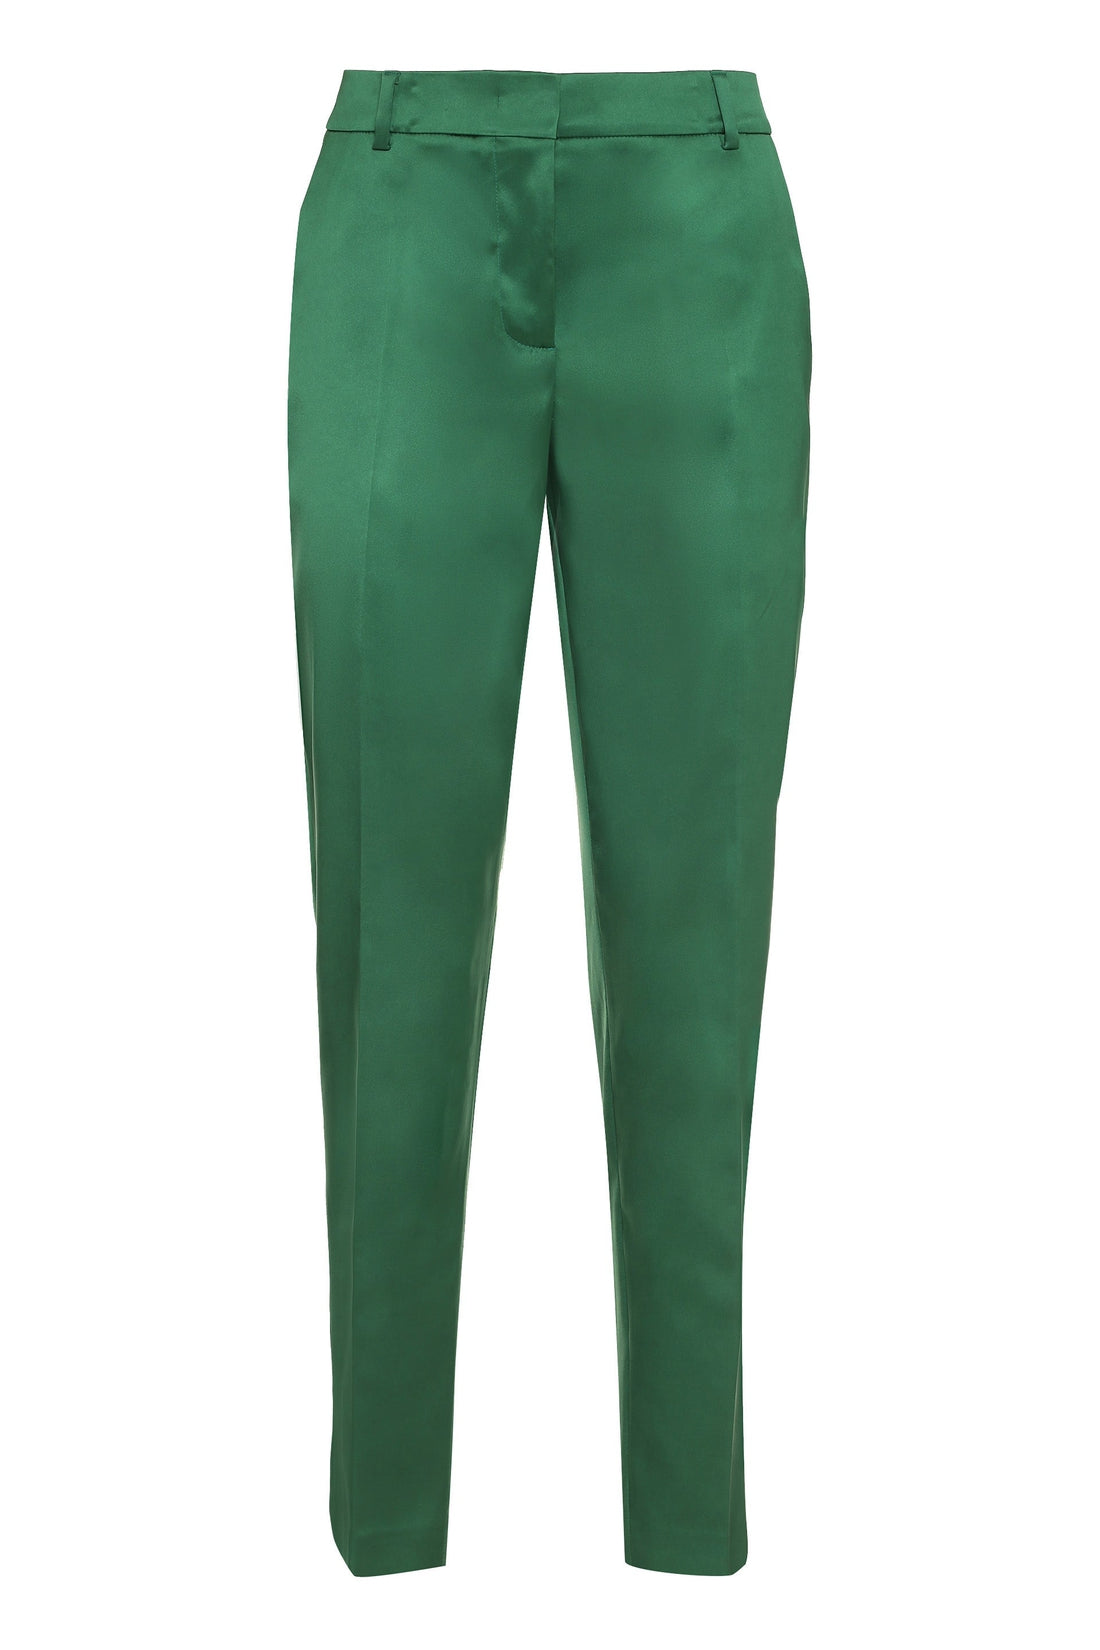 Boutique Moschino-OUTLET-SALE-Satin trousers-ARCHIVIST